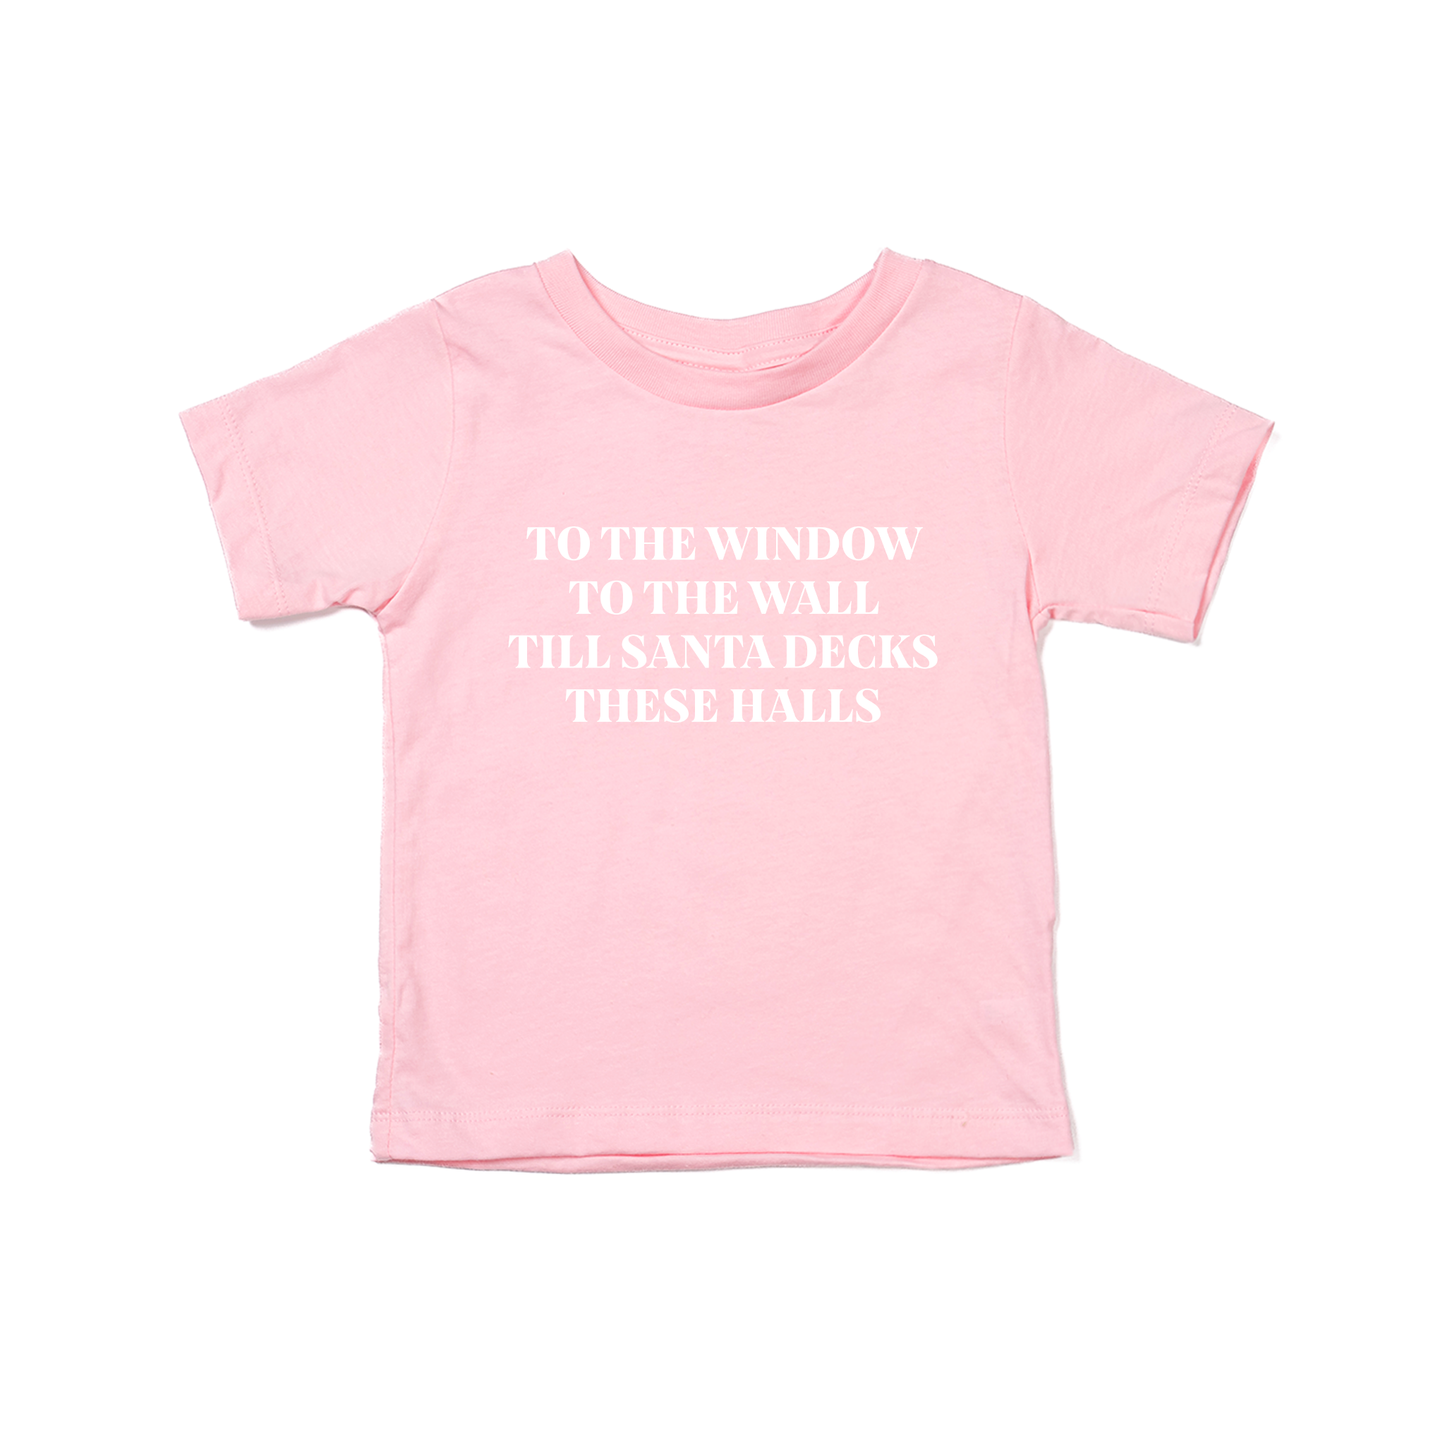 To the Window, To the Wall, Till Santa Decks these Halls (White) - Kids Tee (Pink)